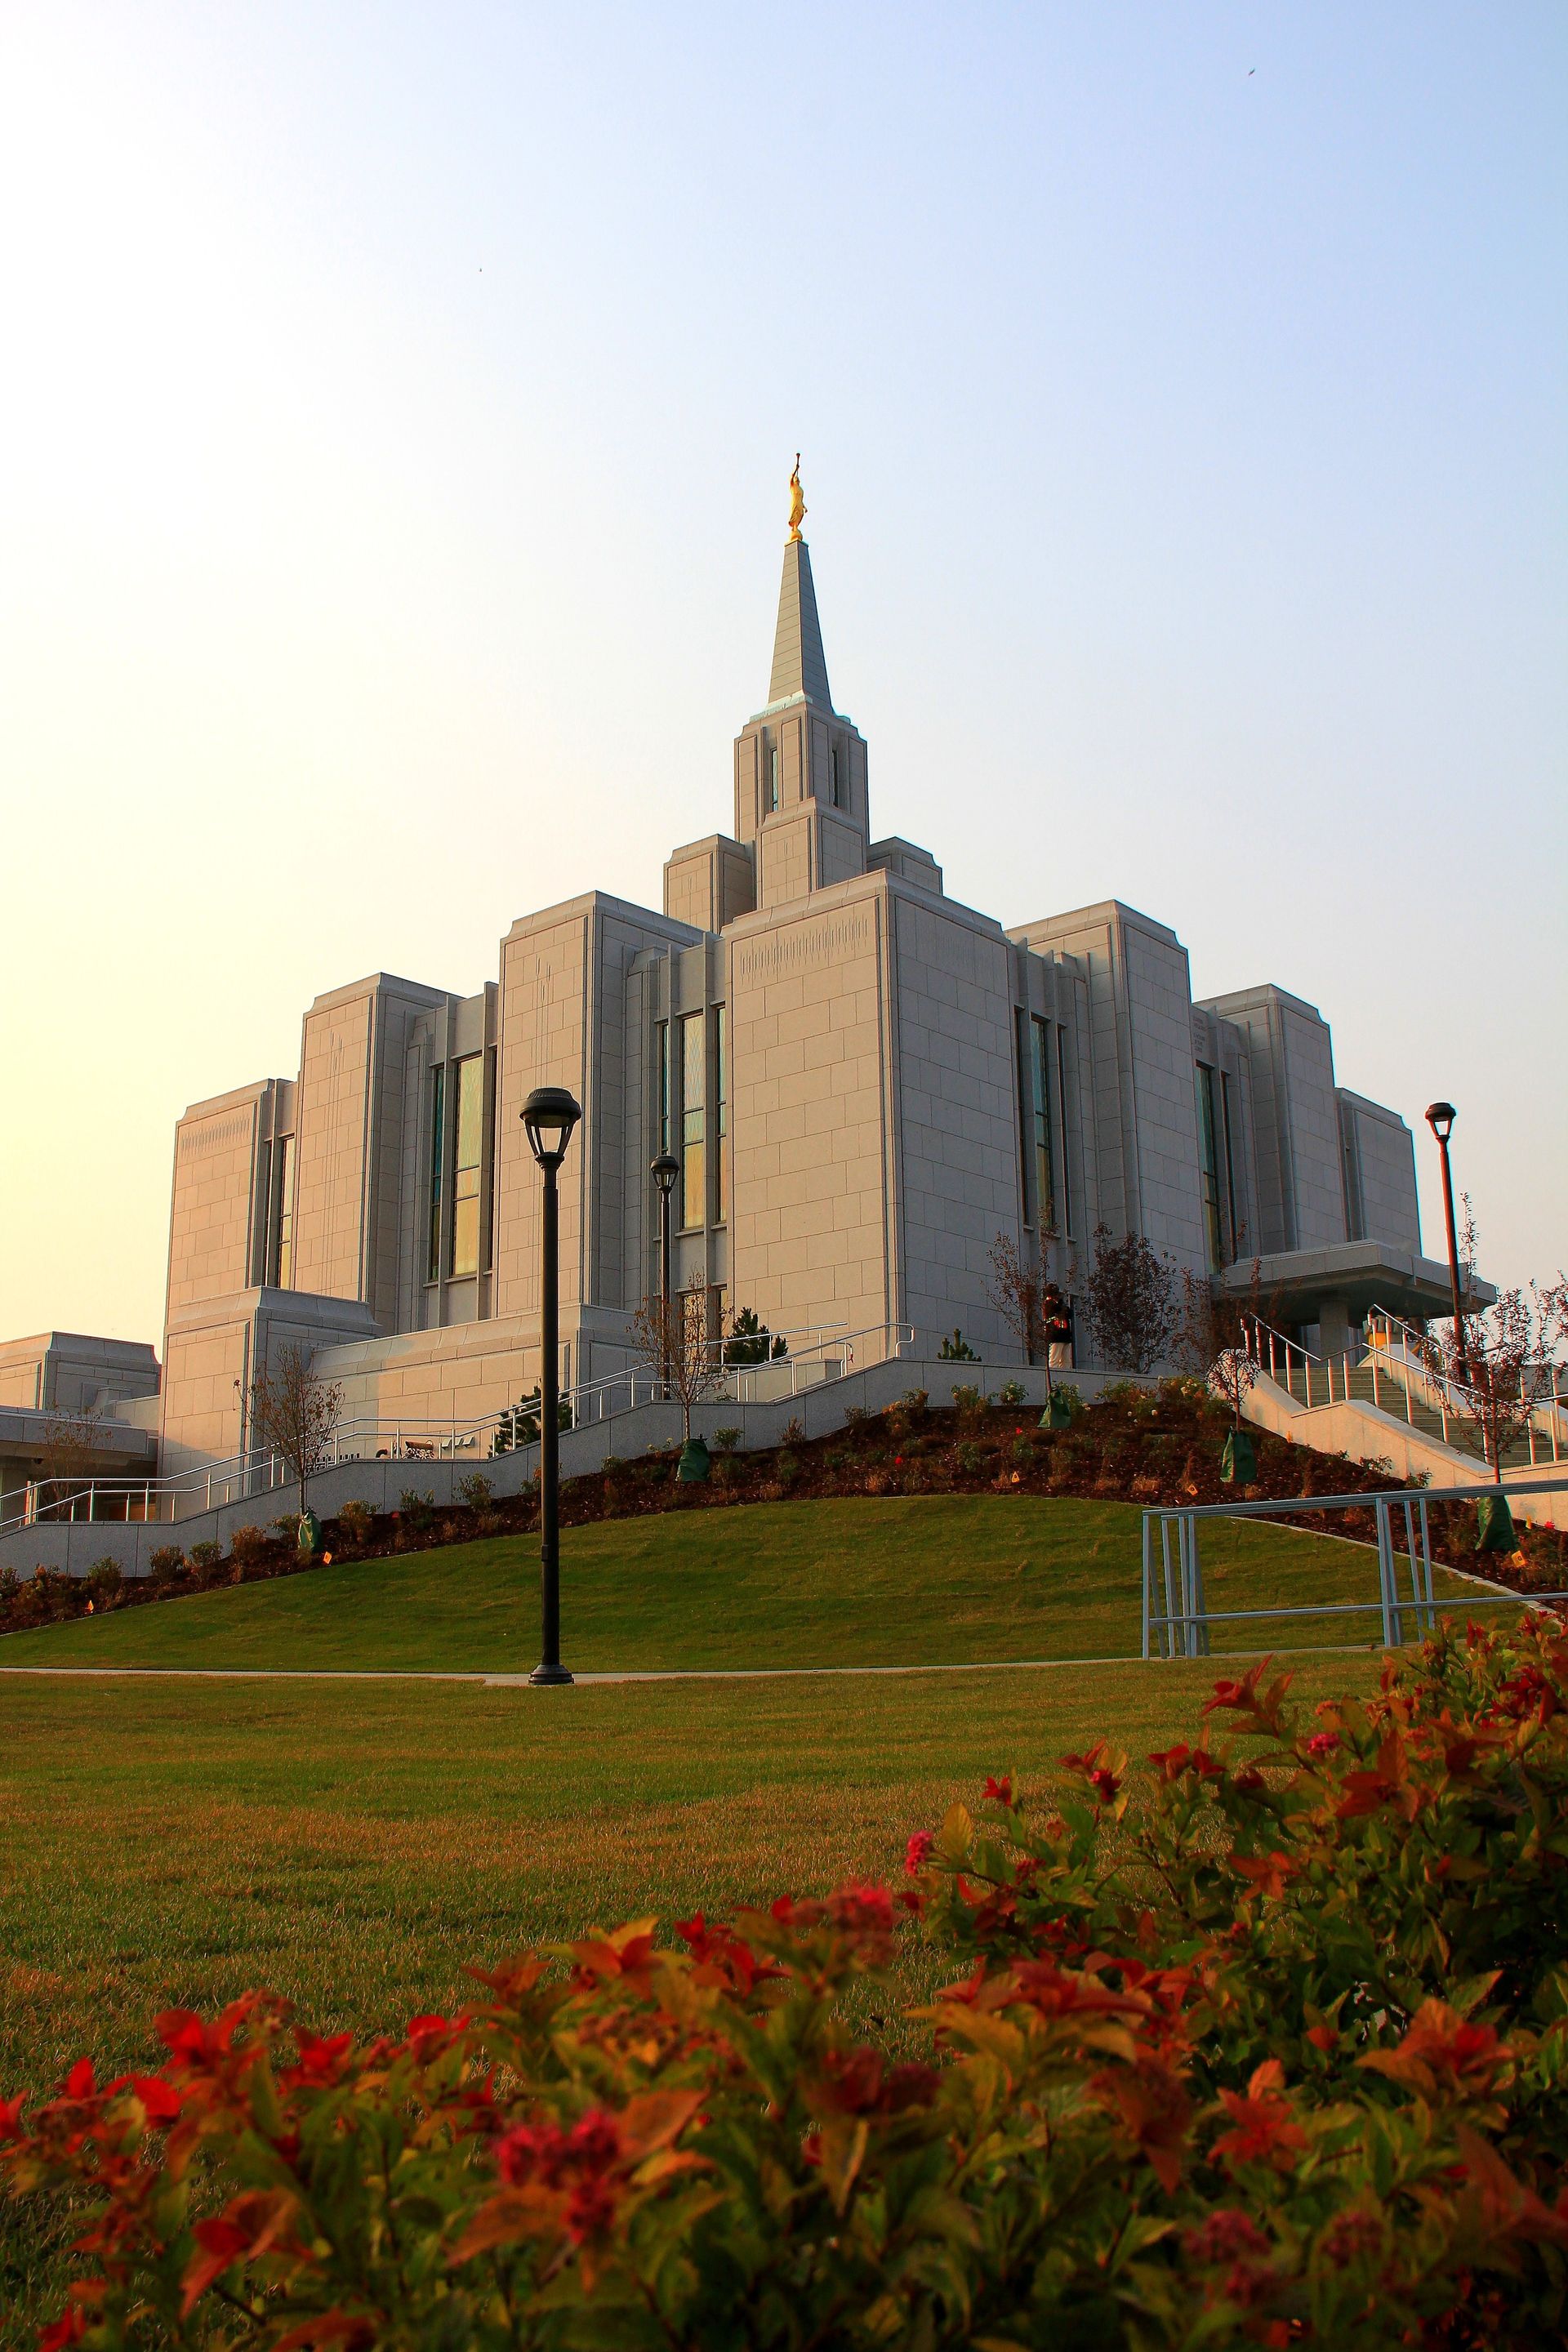 A portrait view of the Calgary Alberta Temple from the temple grounds during the evening.